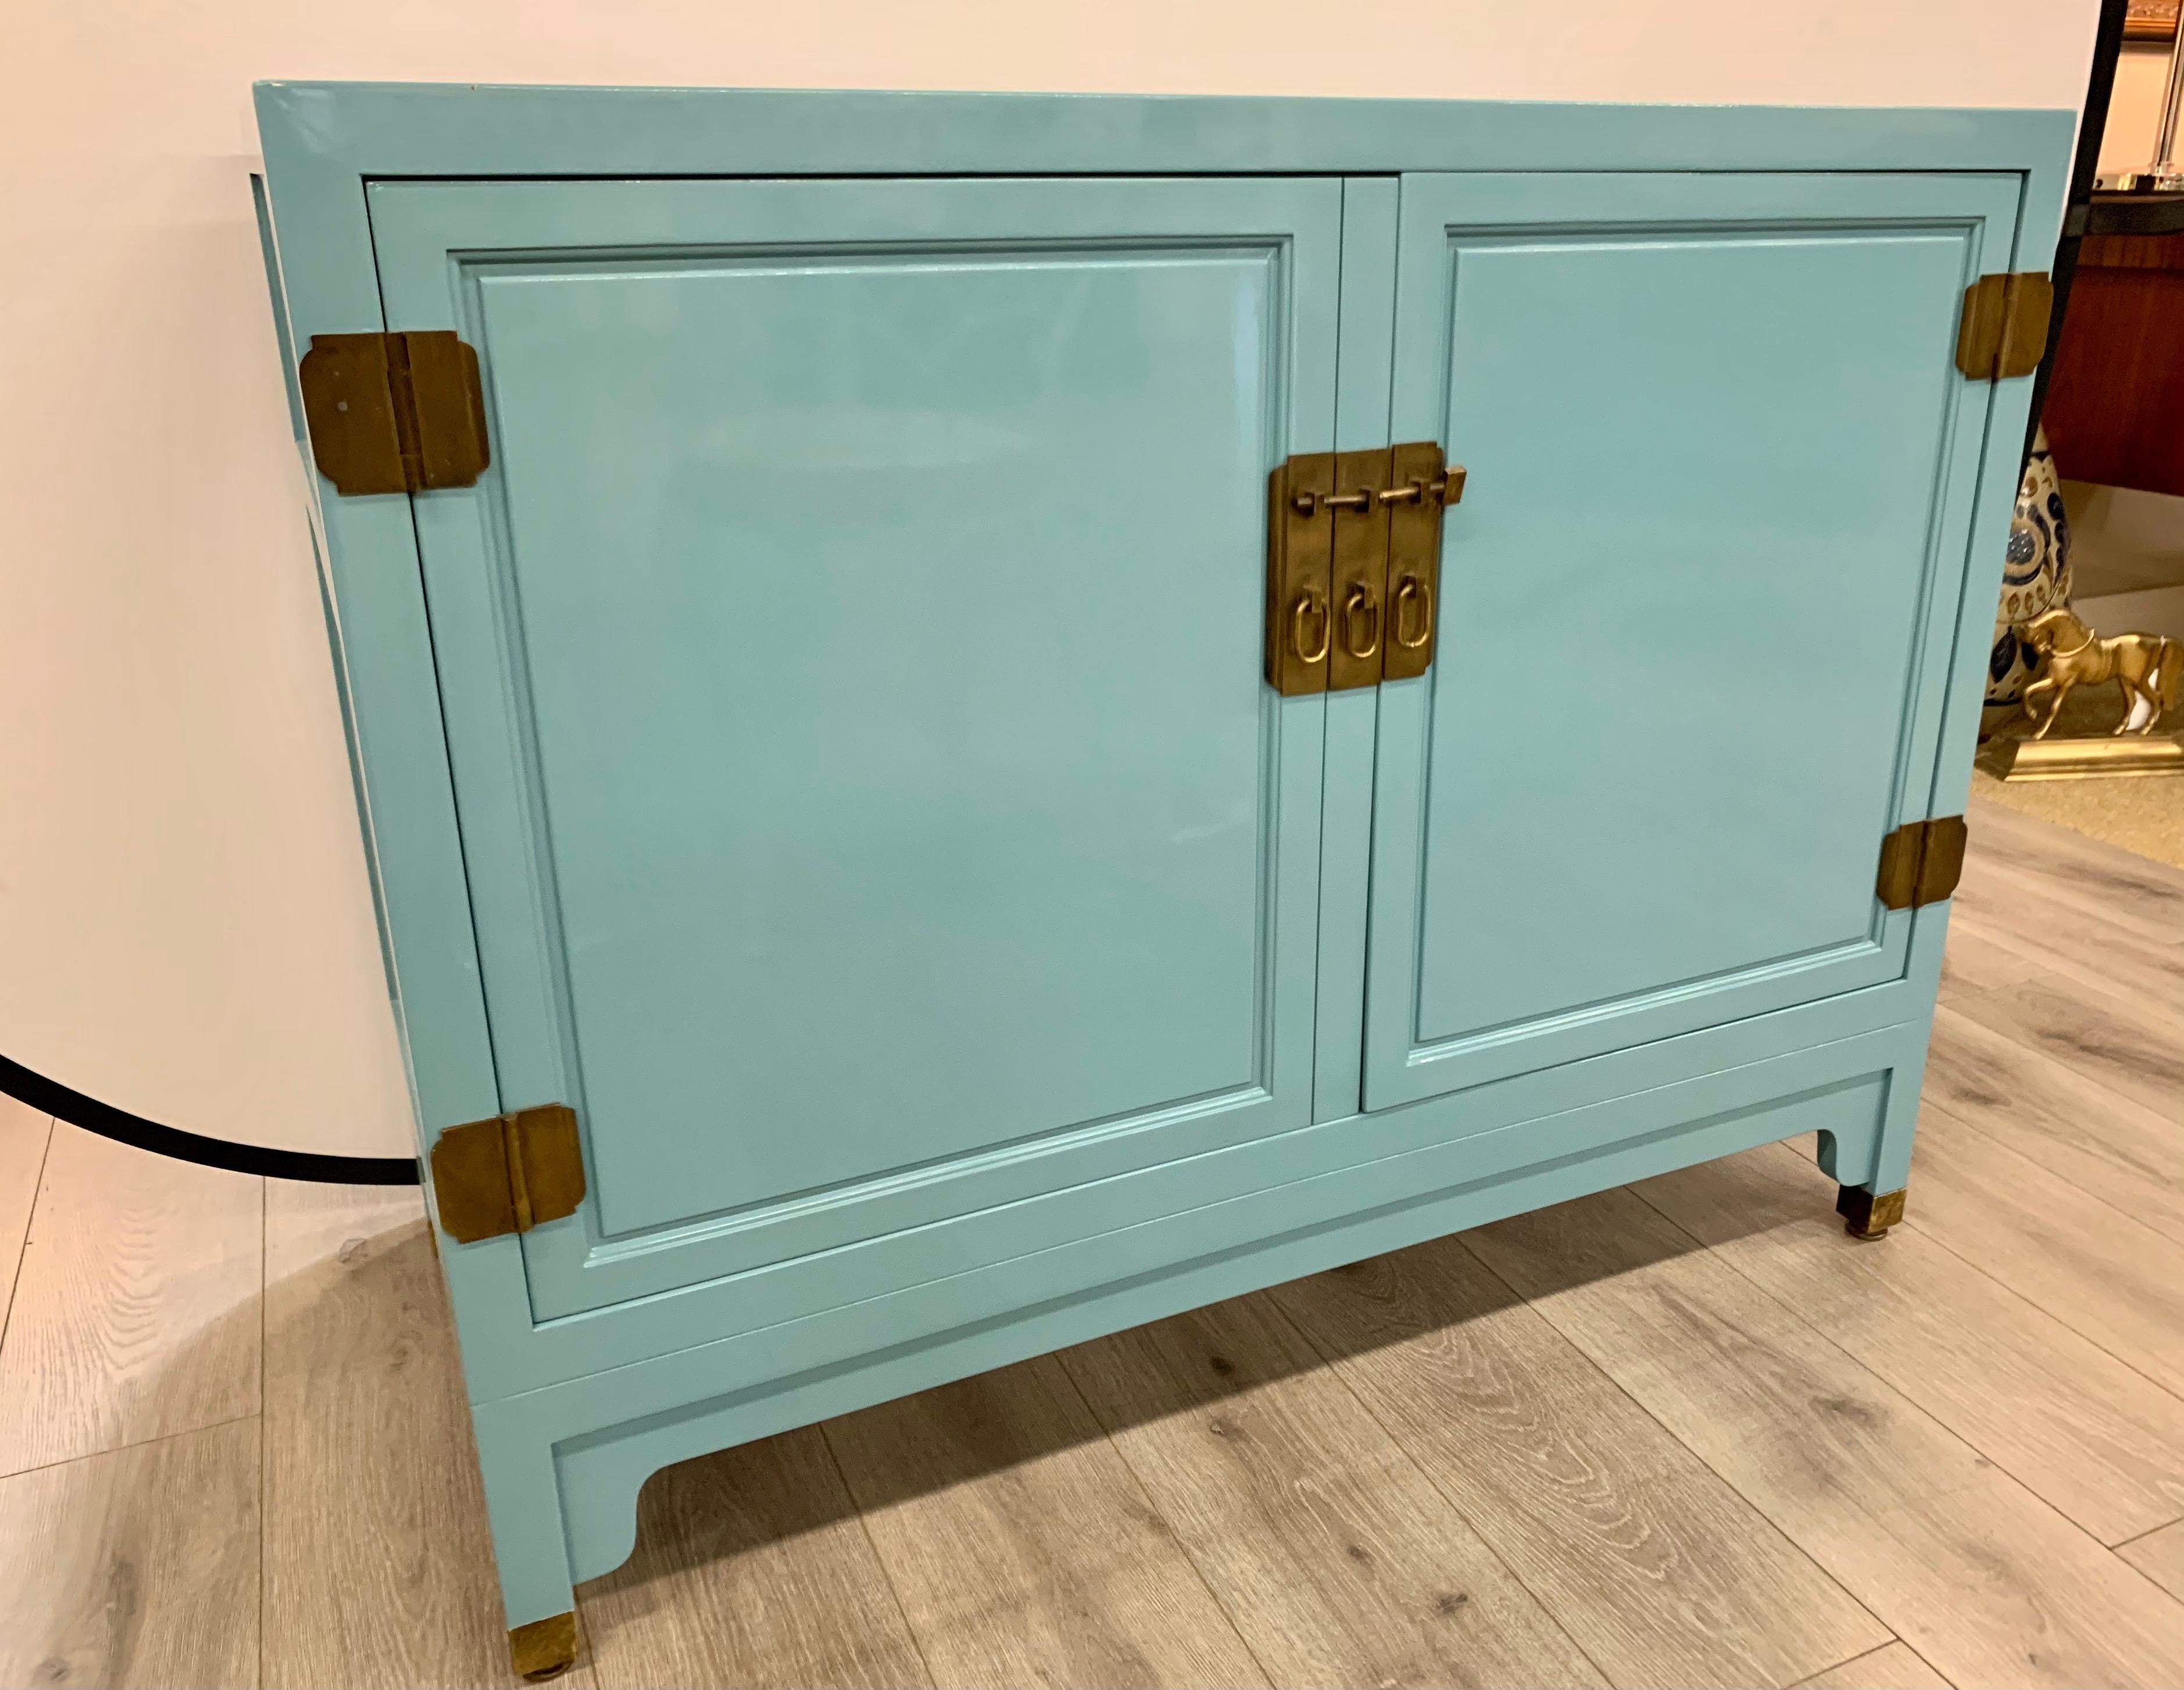 Newly lacquered in a robins egg blue tone is this mid century cabinet. Great scale and better lines. One small paint chip at top - see pics. Otherwise mint condition. Now, more than ever, home is where the heart is.